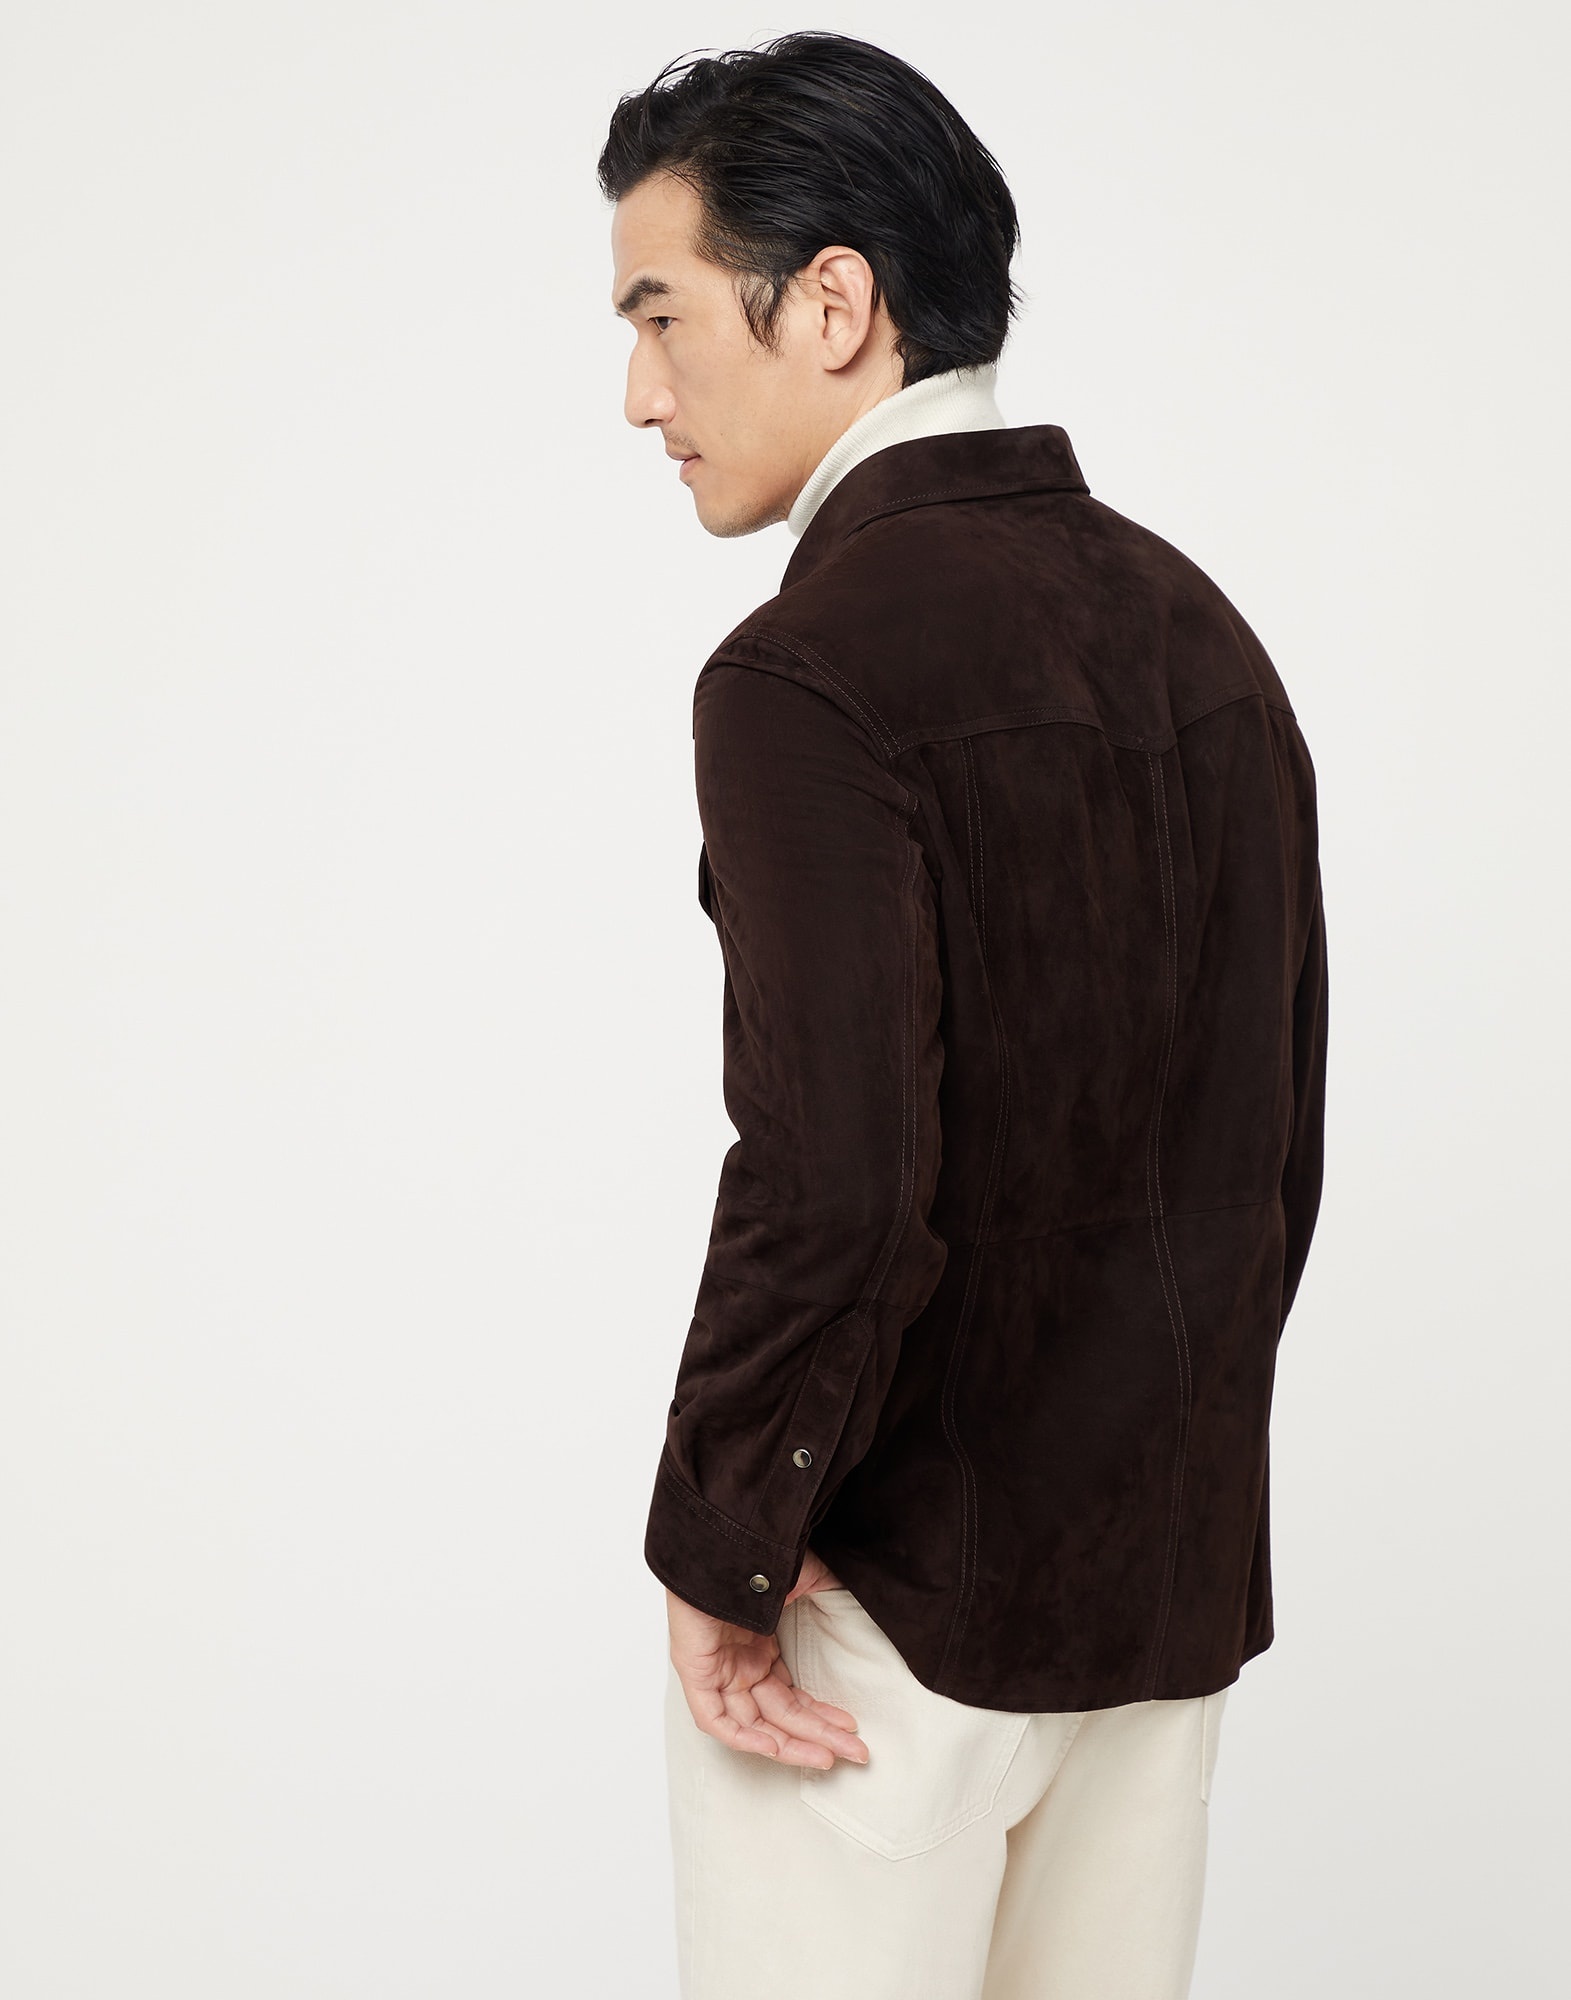 Double face suede shirt-style outerwear jacket - 2